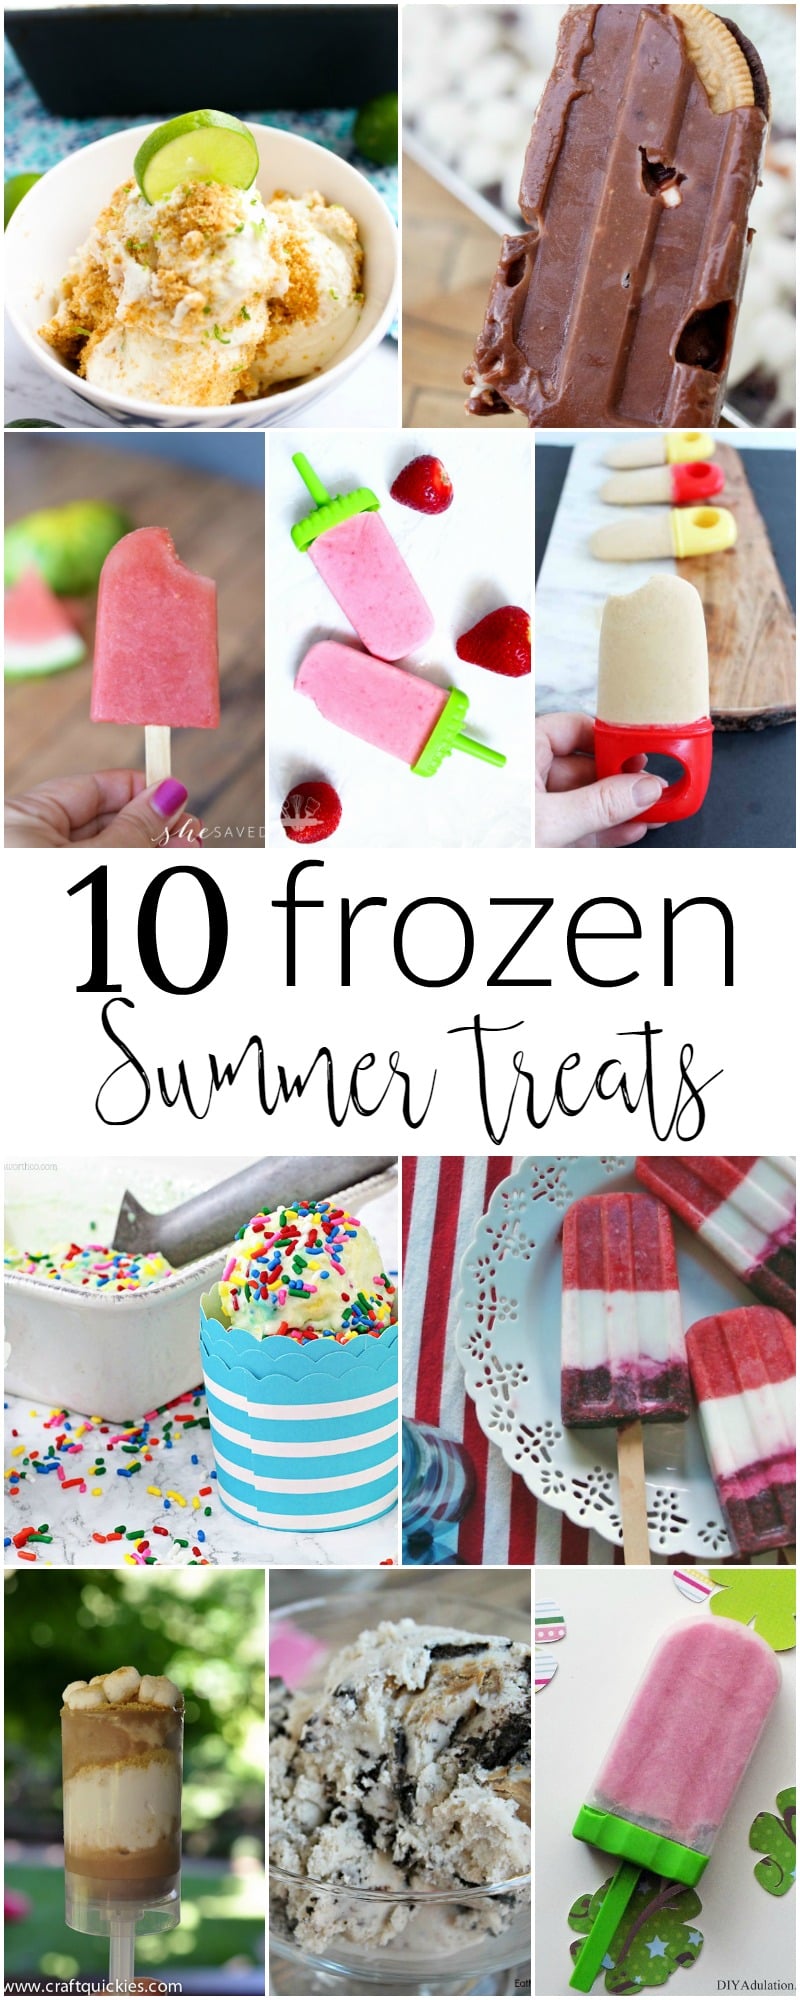 Frozen Summer Treats: 10 Homemade Ice Cream and Popsicle Recipes